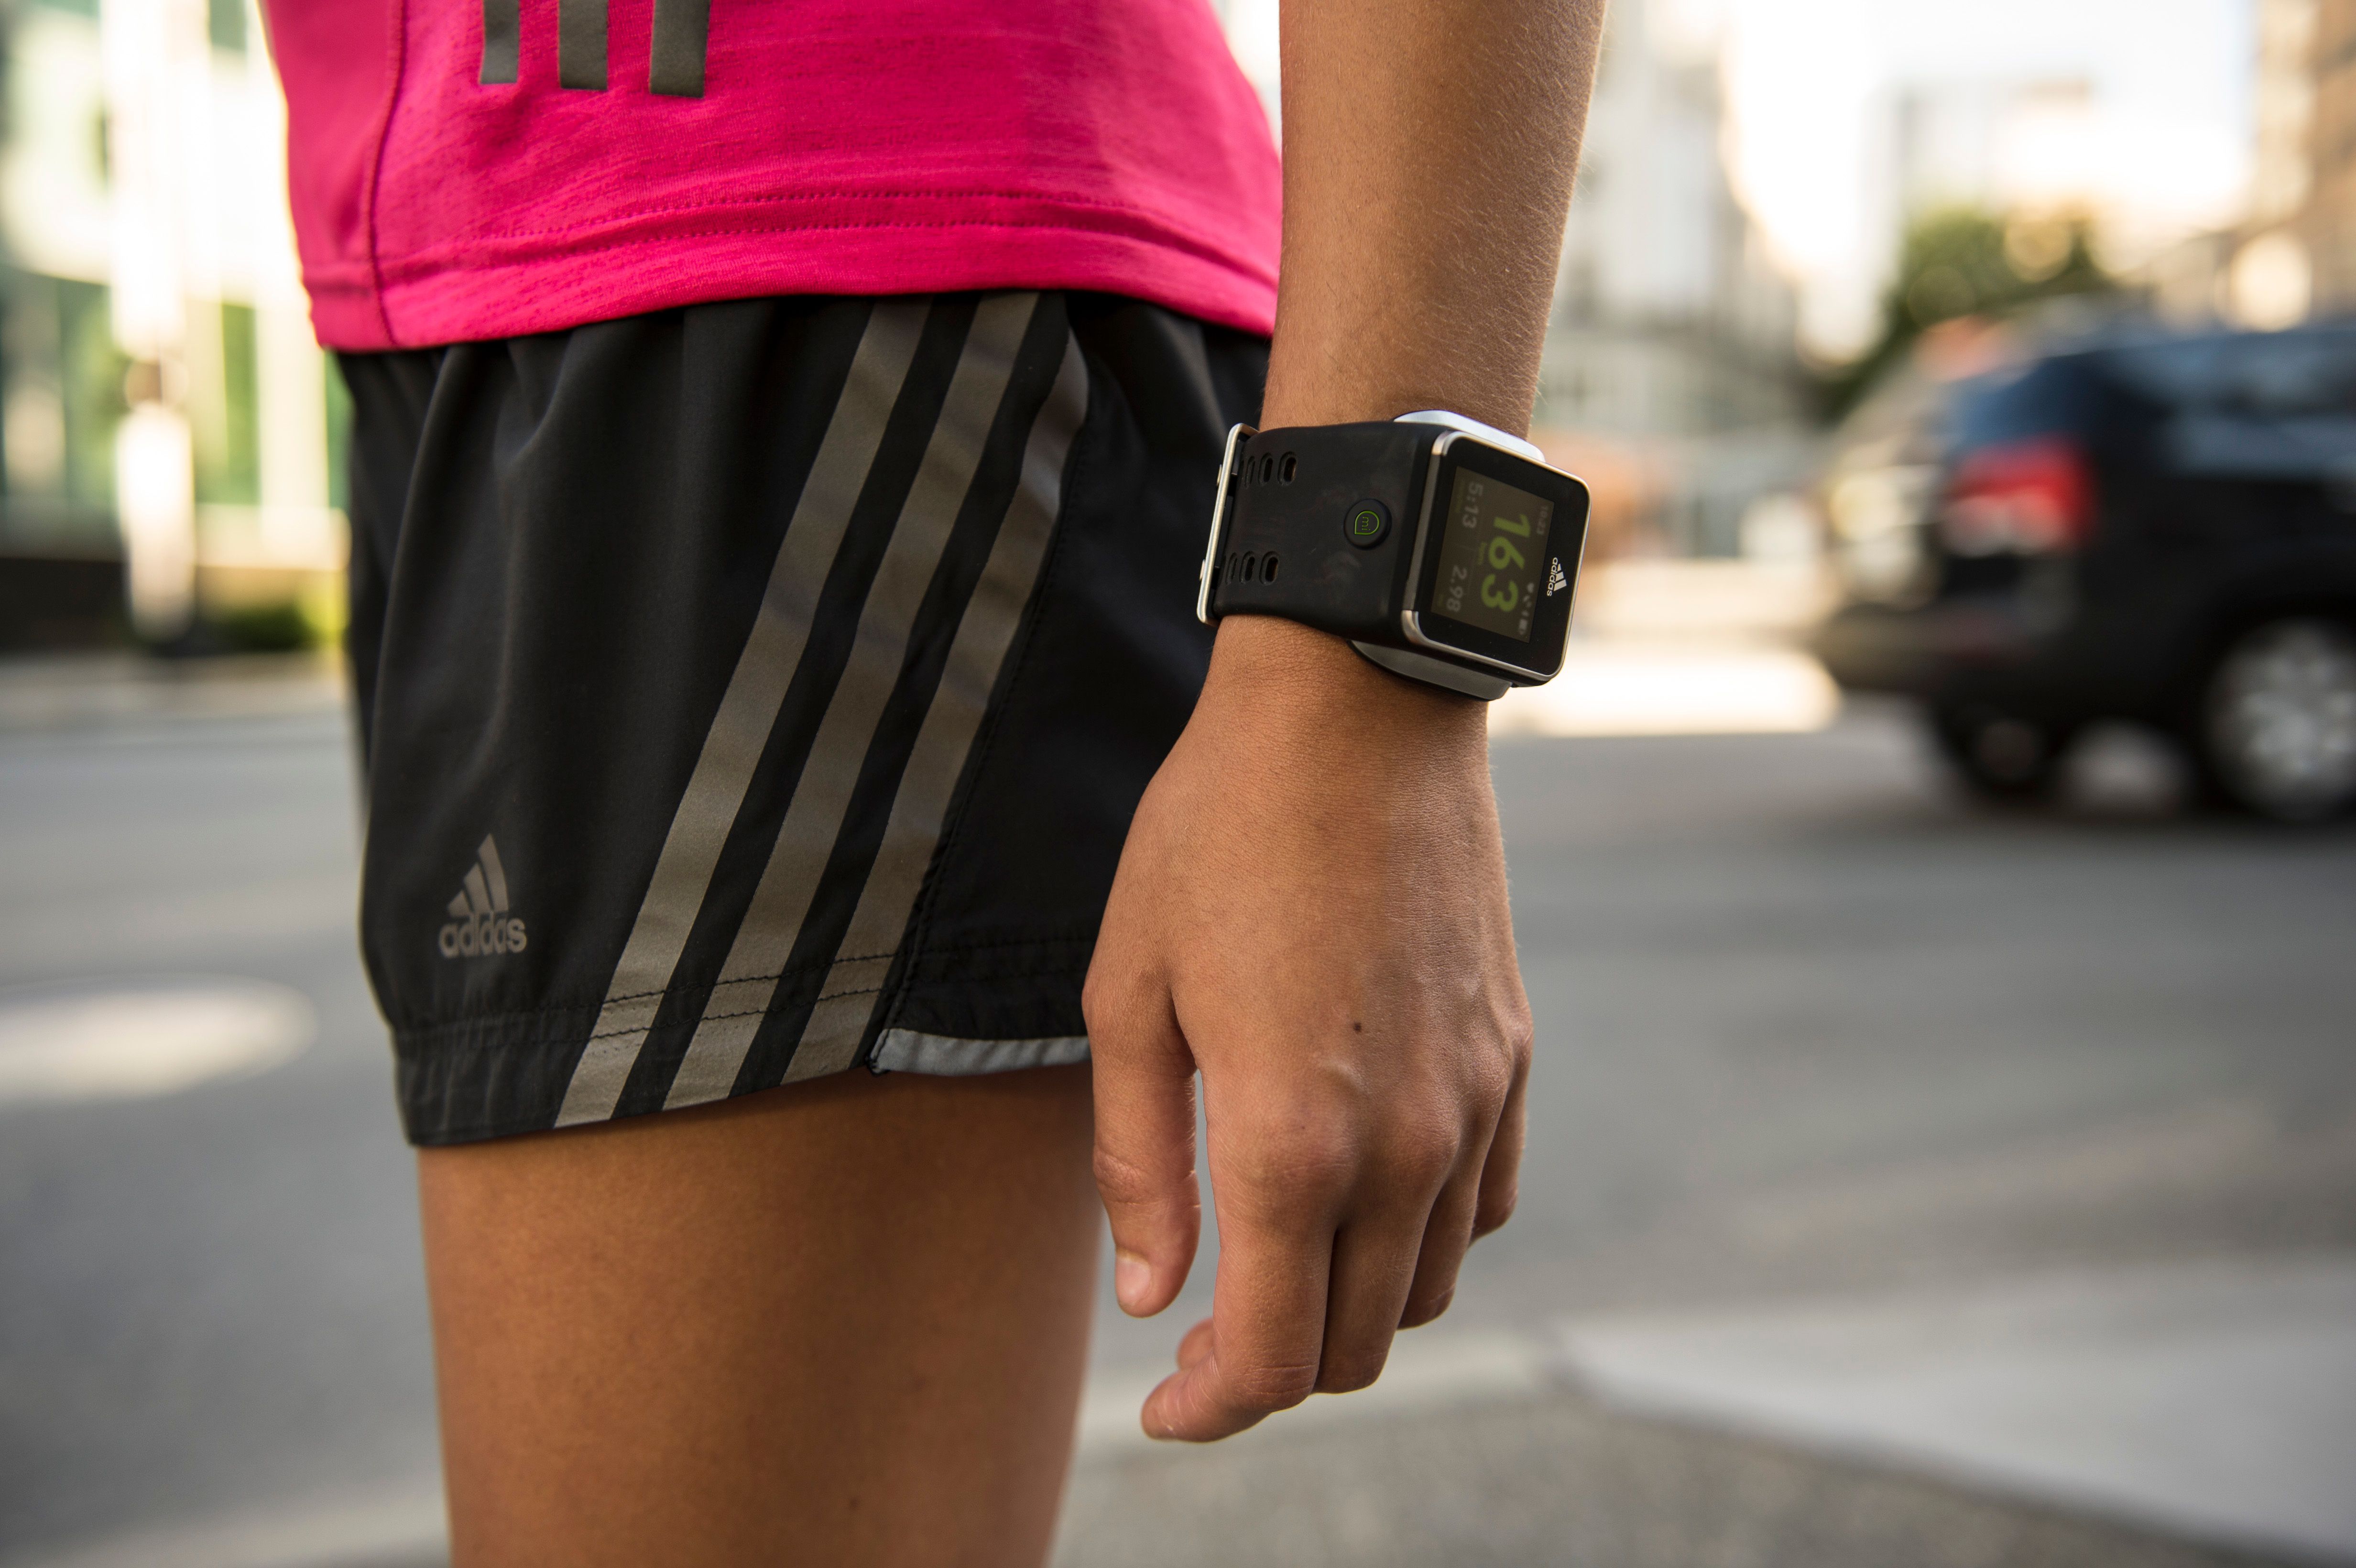 adidas could develop apps for other watches image 1